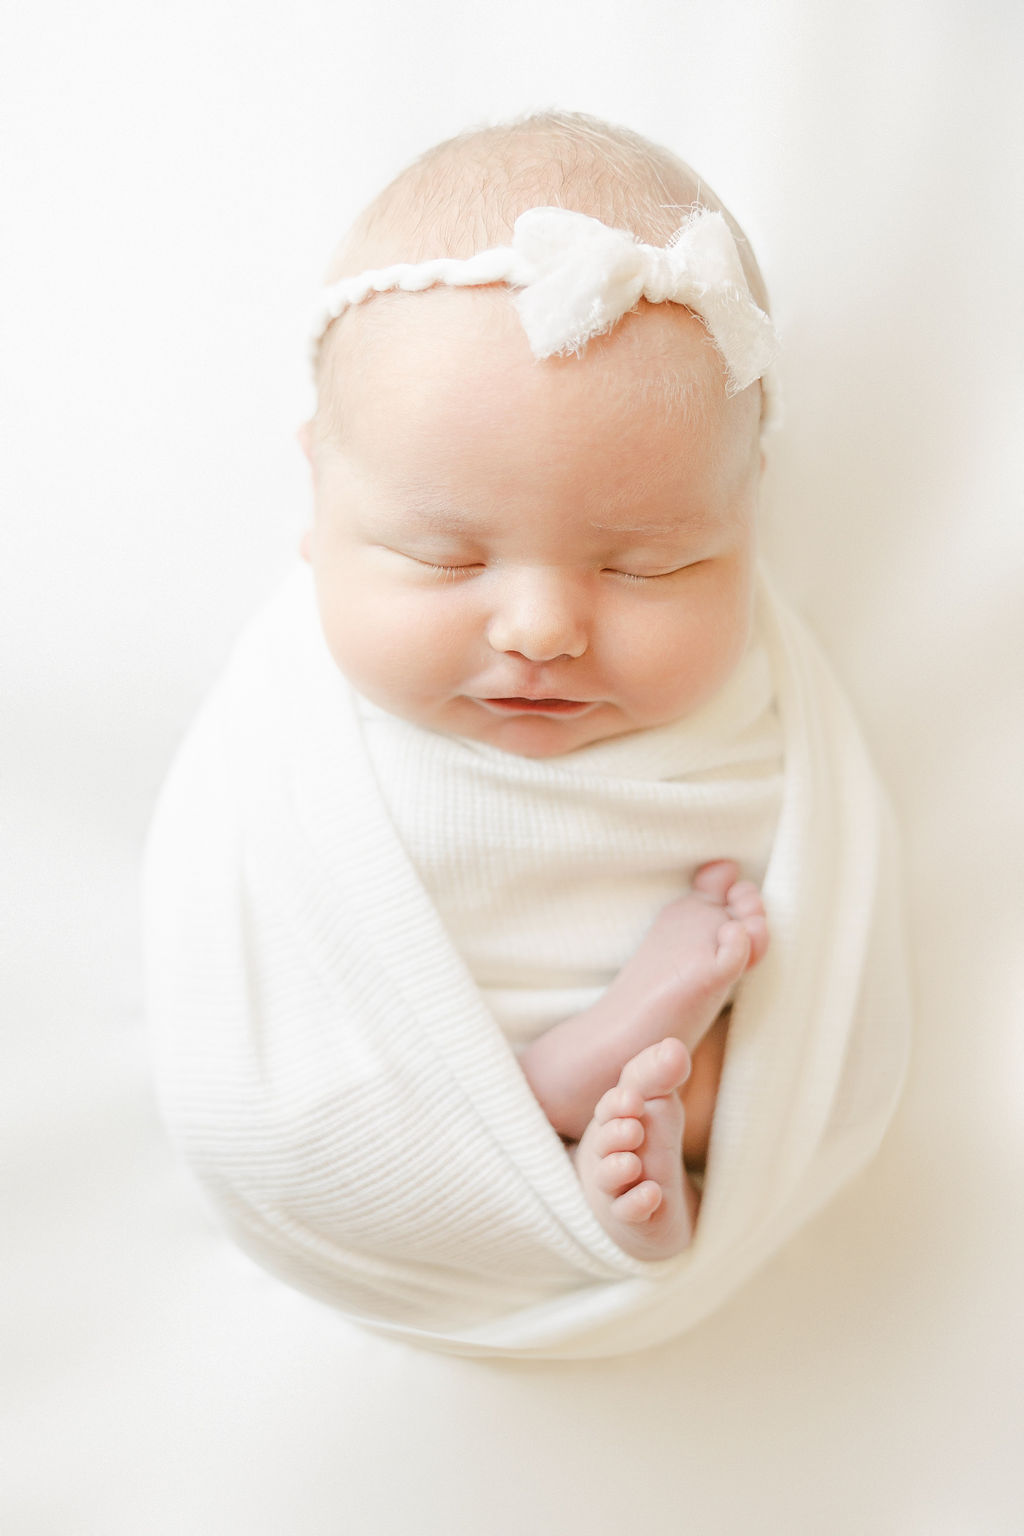 A newborn baby sleeps in a white swaddle in a studio